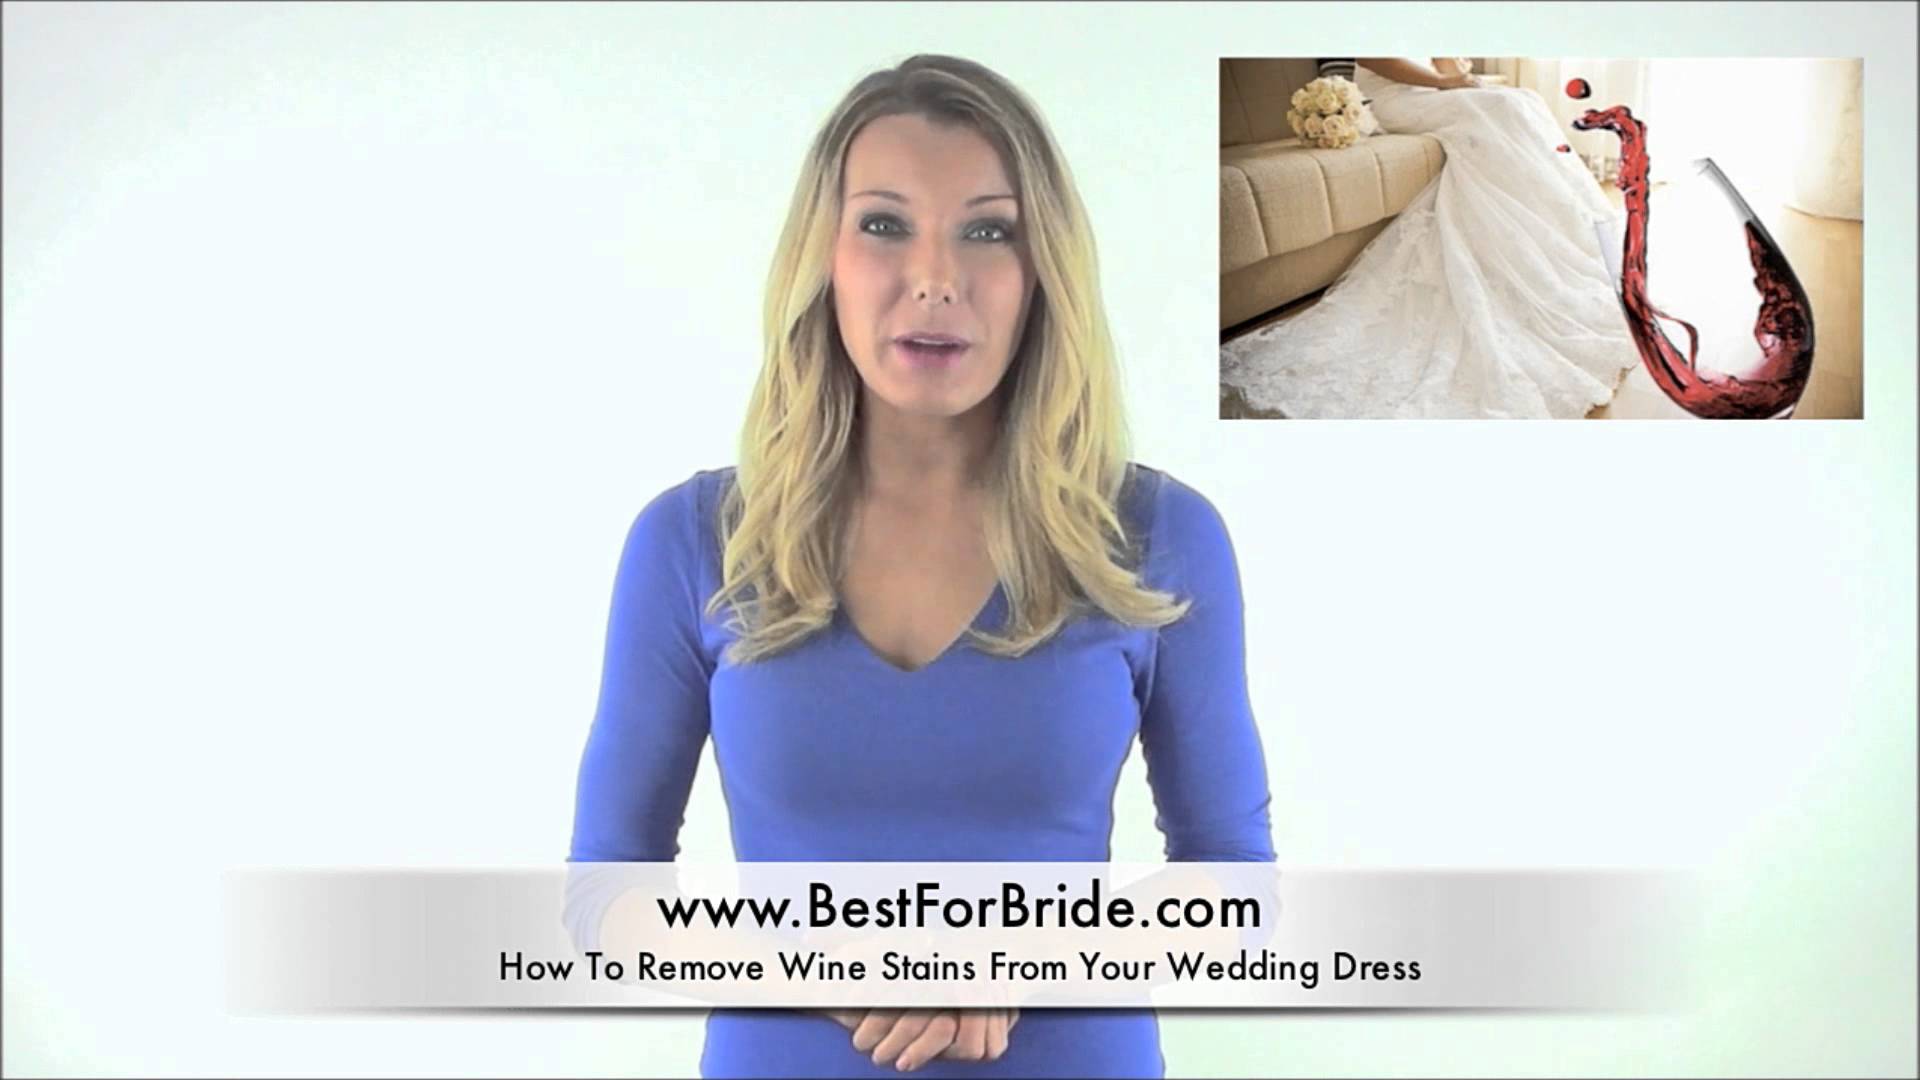 Wedding Expert Minute Tip 2 – How to Remove Wine Stains from your Wedding Dress